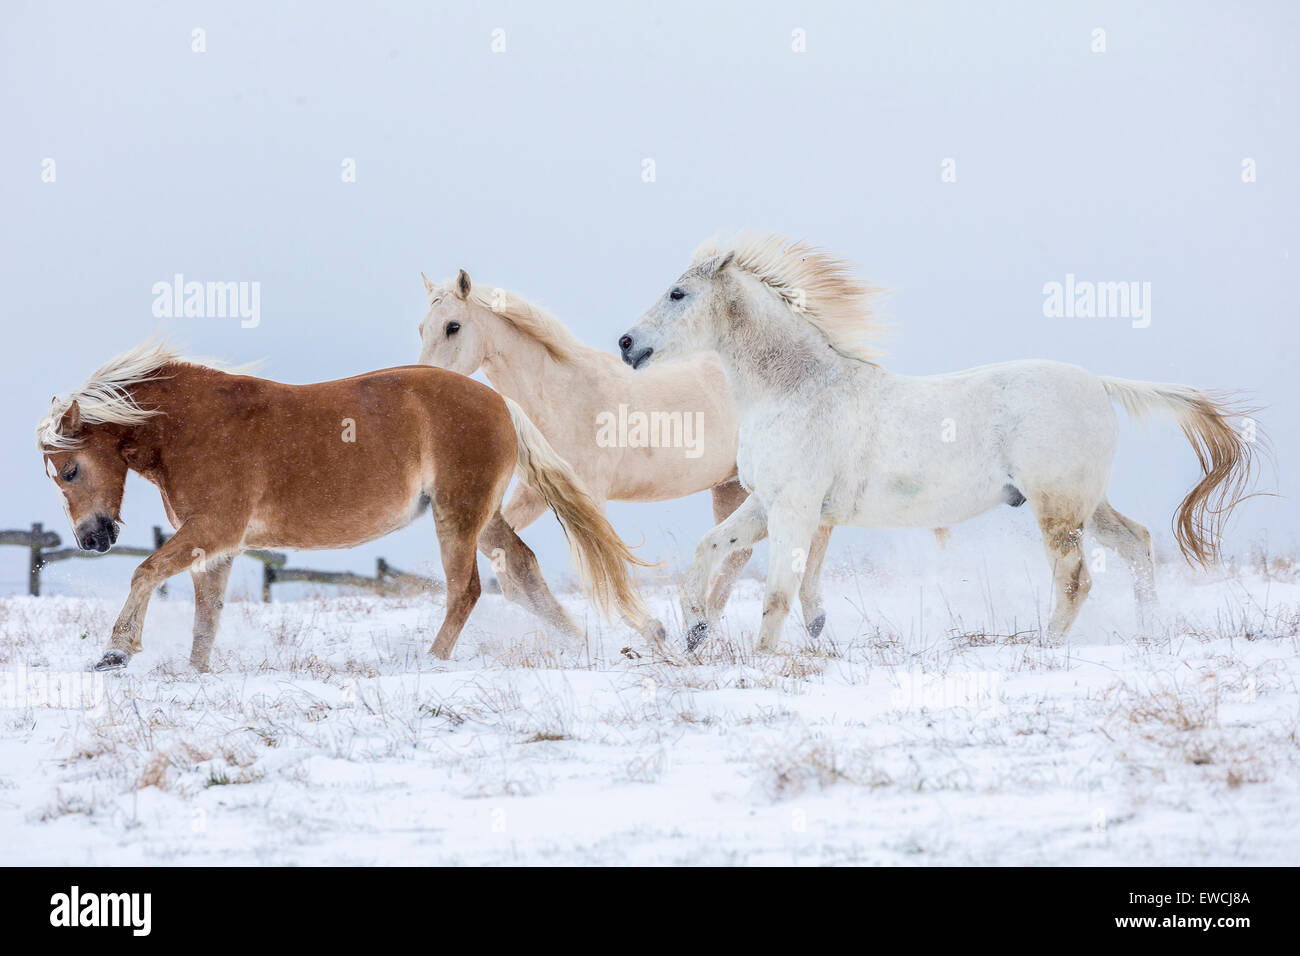 Domestic horse. Three horses trotting on a snowy pasture. Germany Stock Photo